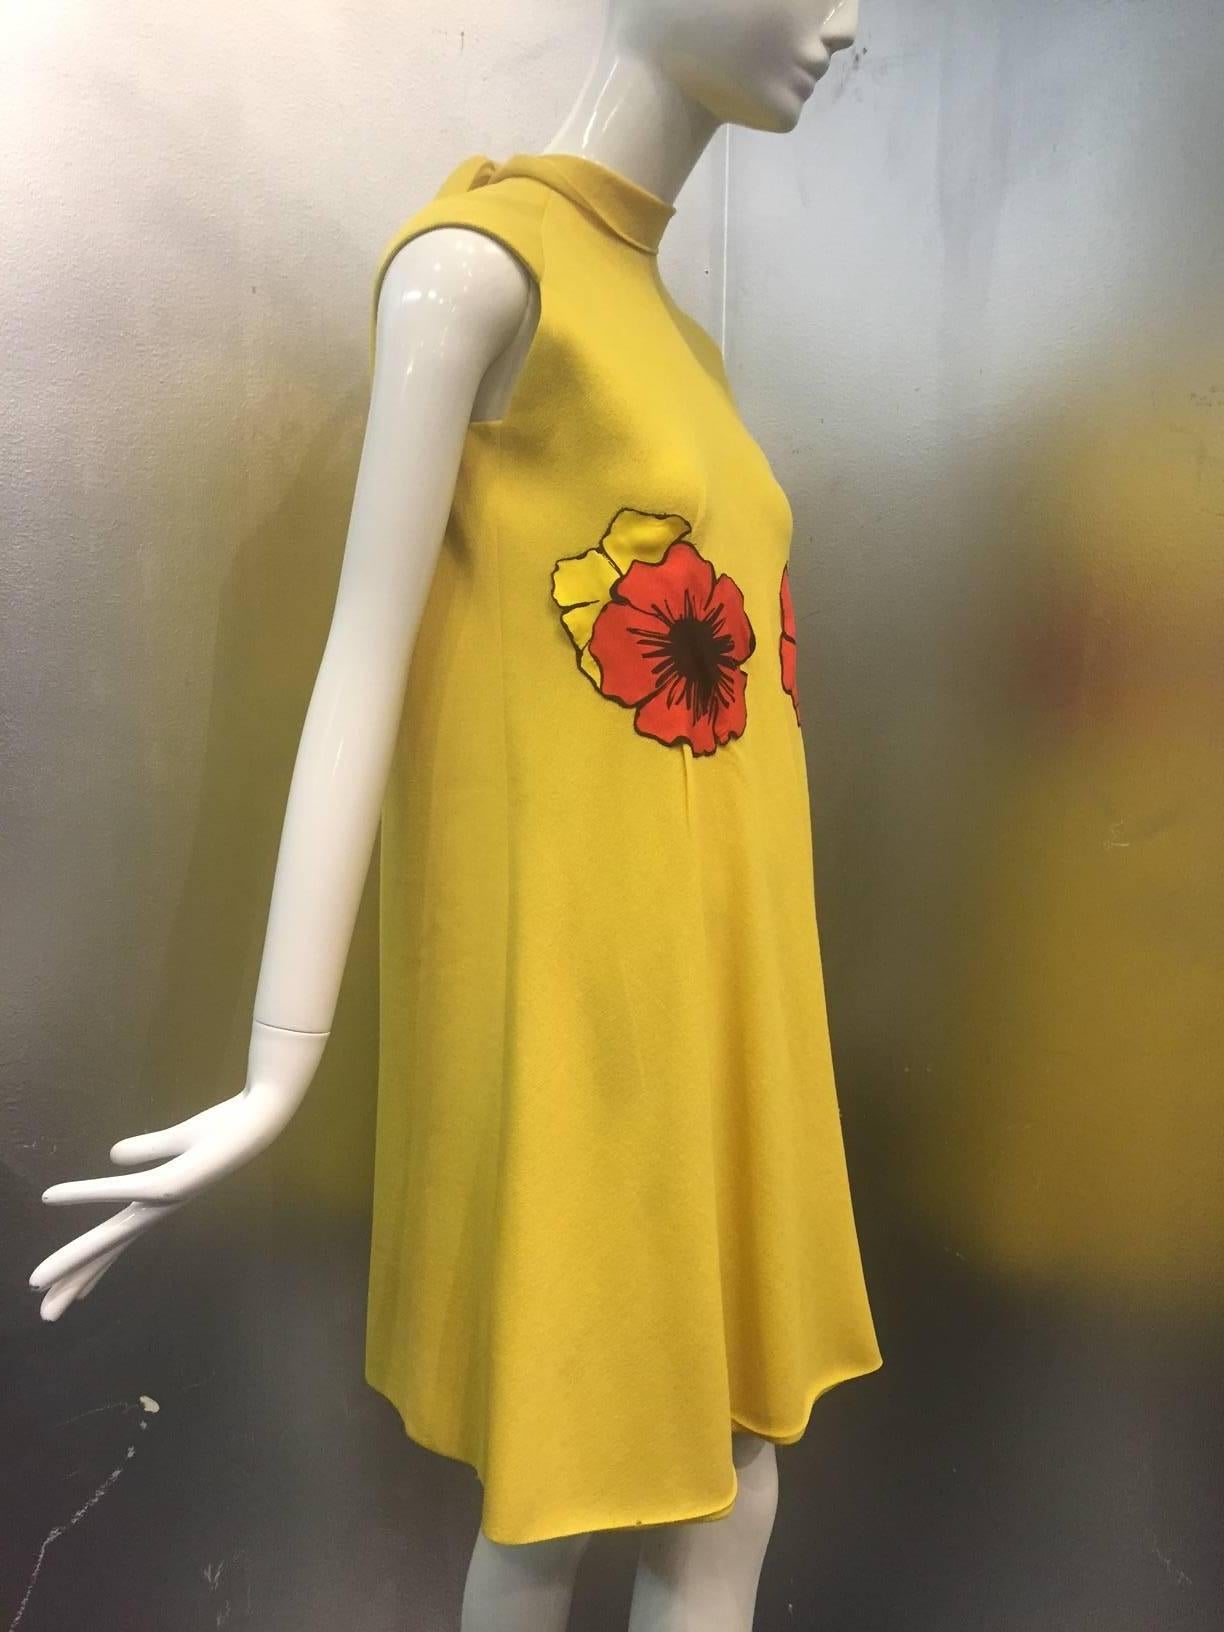 1960s Pauline Trigere lemon yellow lightweight wool crepe trapeze dress with brilliant seaming and construction.   Fully lined.  Silk poppy print appliqués are under bust and also have spaces underneath for a thin yellow belt (not included) at the